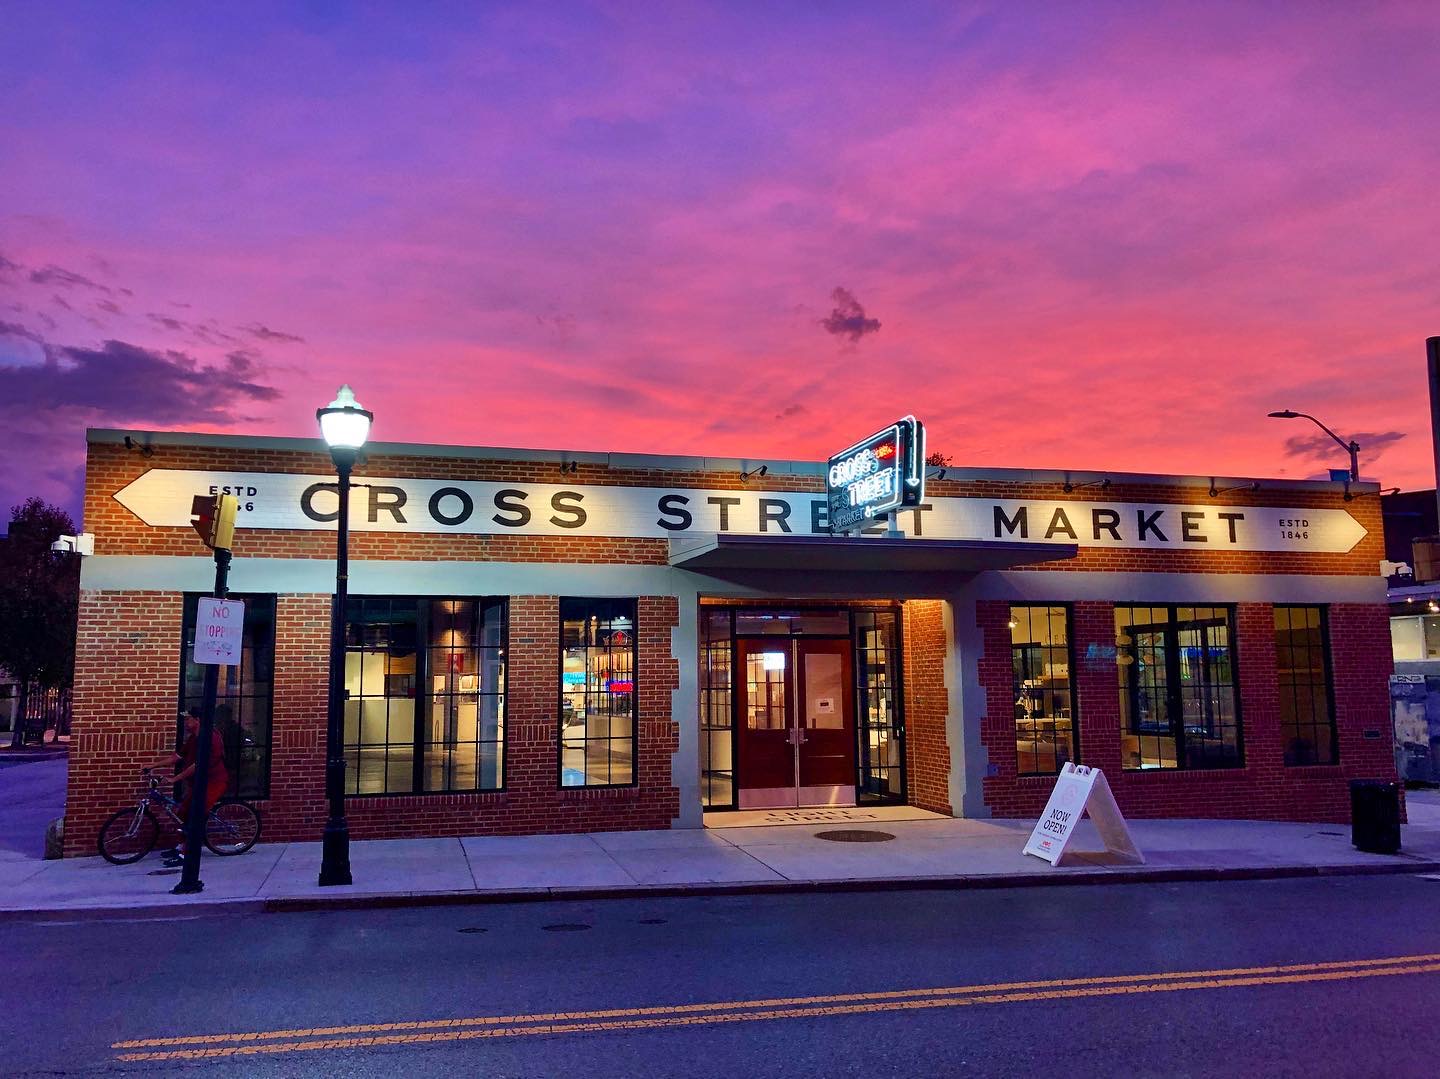 Exterior of Cross Street Market with a colorful sunset in the background